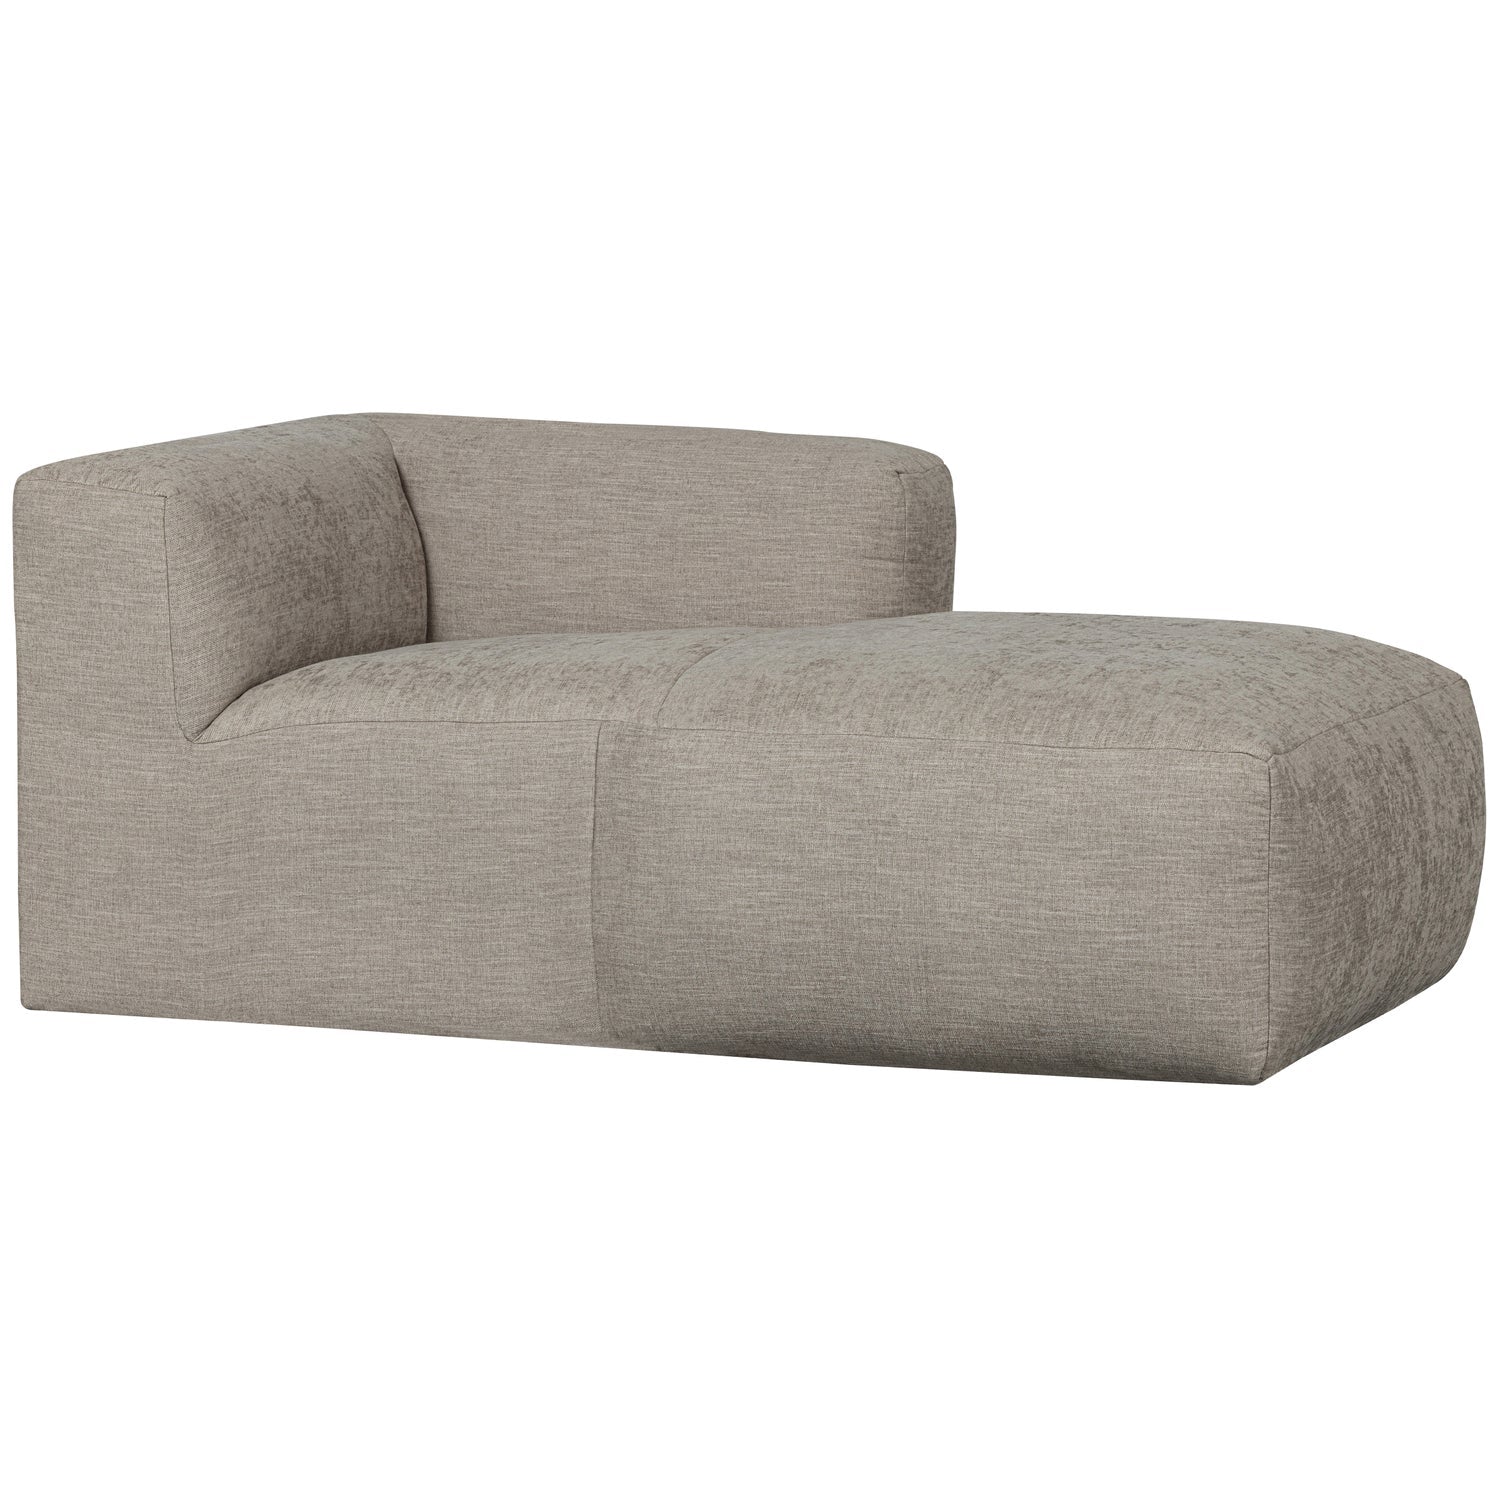 YENT CHAISE LONGUE ELEMENT ARM RIGHT WOVEN FABRIC NATURAL